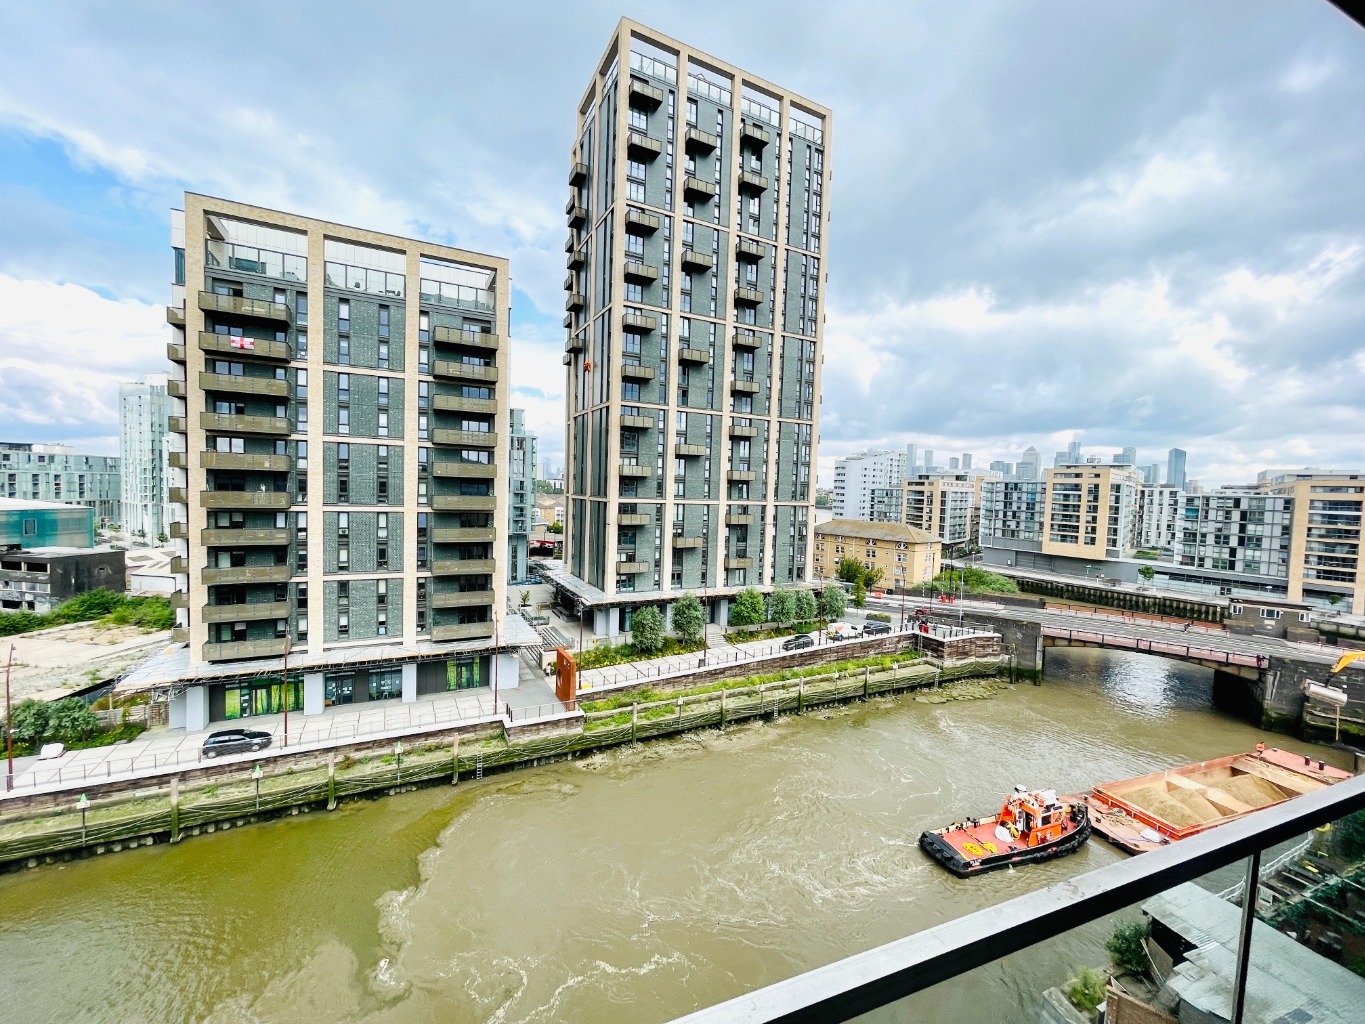 * SEE VIDEO WALKTHROUGH TOUR * ONE  BEDROOM *SEVENTH FLOOR * OWN PRIVATE BALCONY * LIFT SERVICE * MODERN BATHROOM * STUNNING CREEK VIEWS * AVAILABLE FOR IMMEDIATE OCCUPANCY *  UNDER A QUARTER OF A MILE FROM CUTTY SARK & GREENWICH DLR STATIONS *